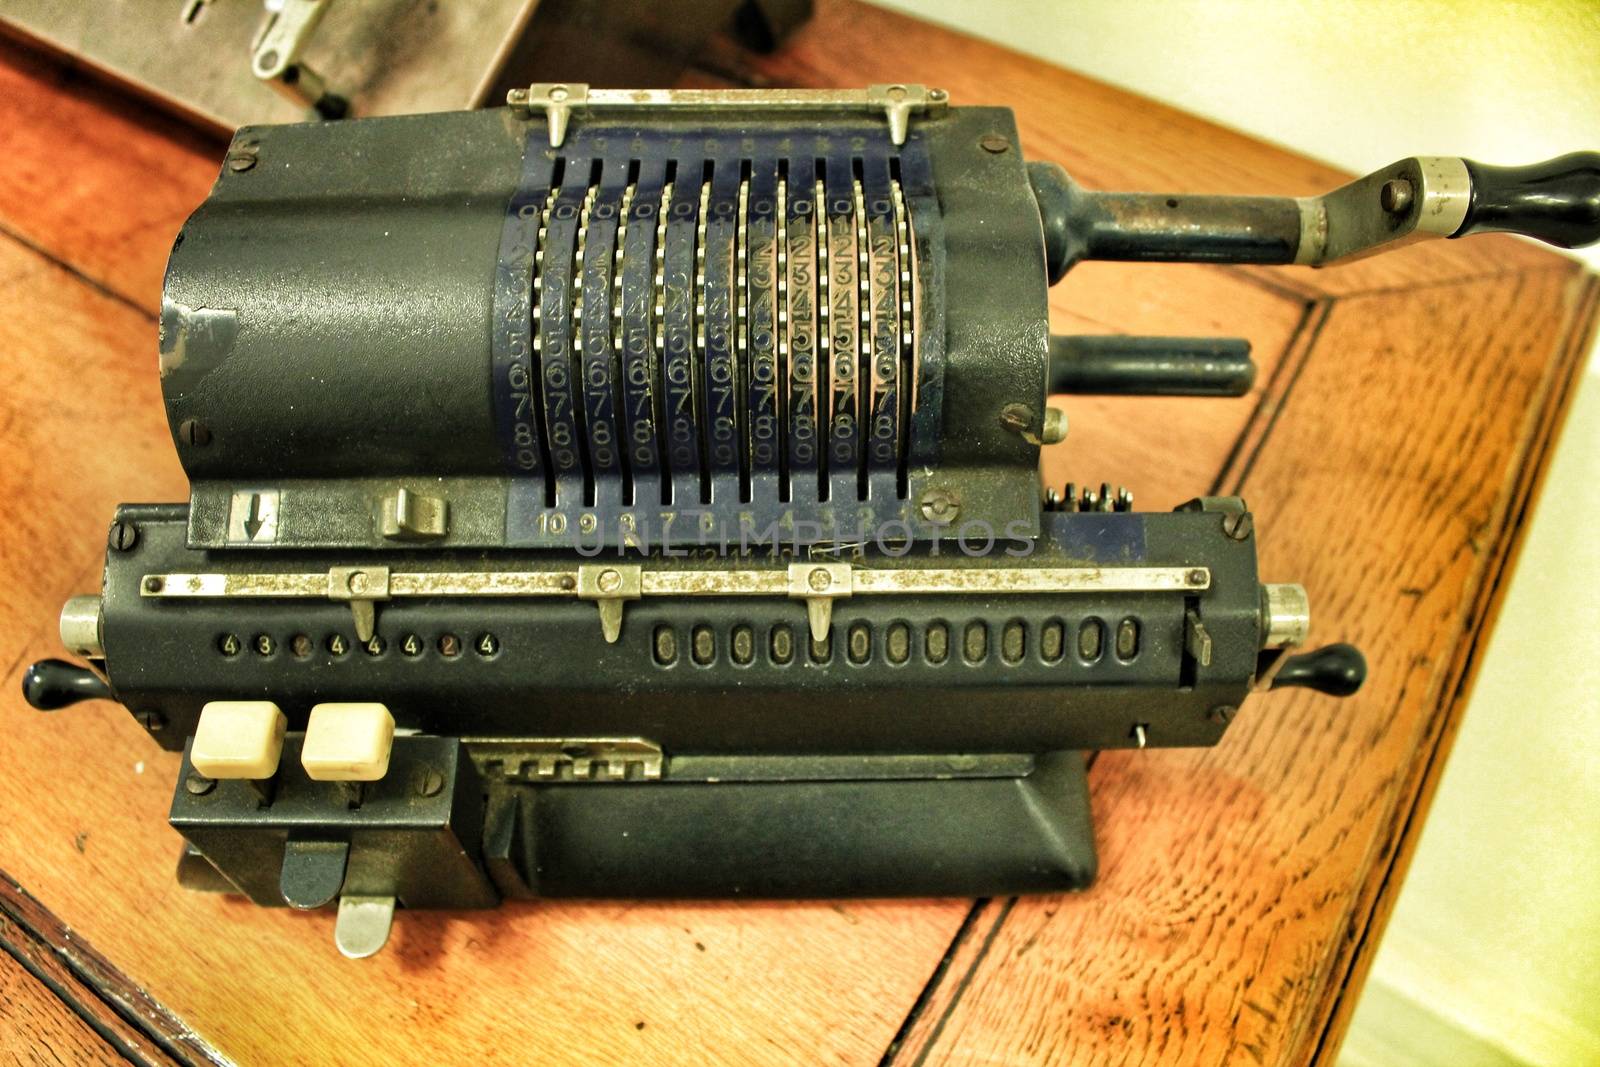 Old calculating machine by soniabonet